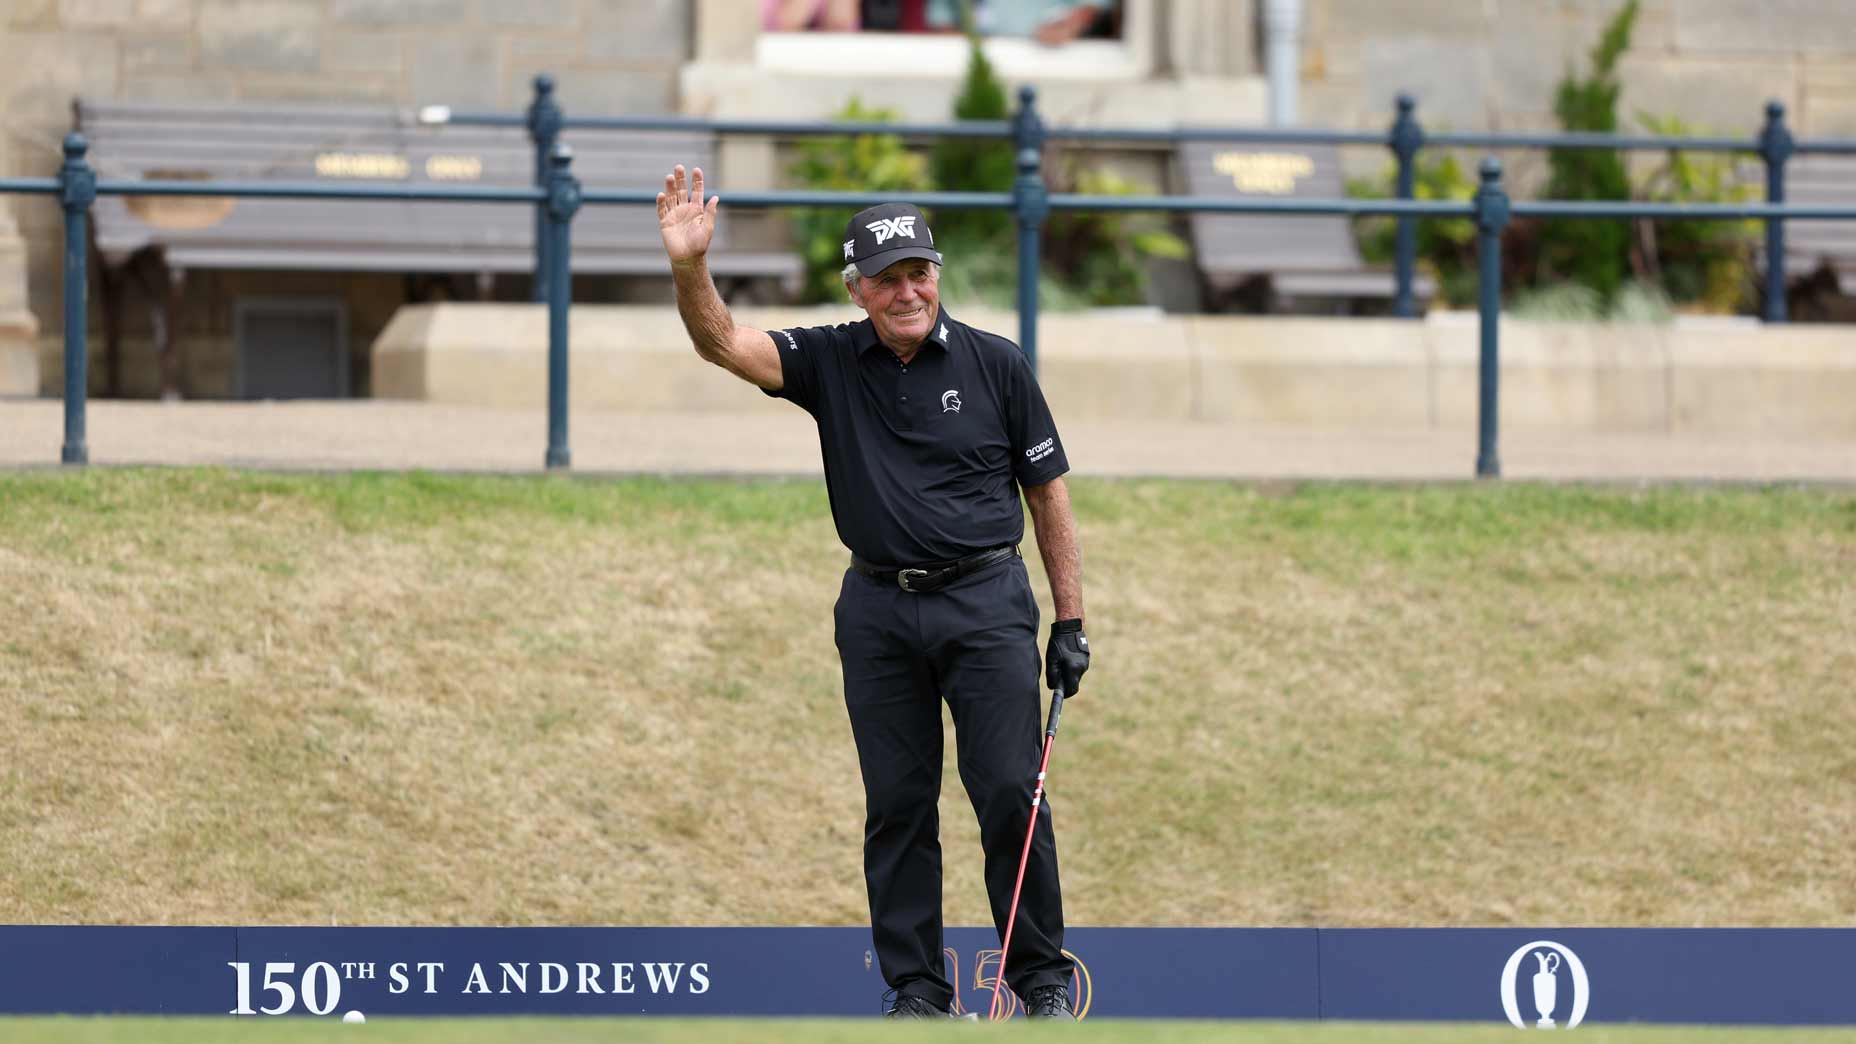 Gary Player of South Africa waves to the crowd on the first during the Celebration of Champions prior to The 150th Open at St Andrews Old Course on July 11, 2022 in St Andrews, Scotland.